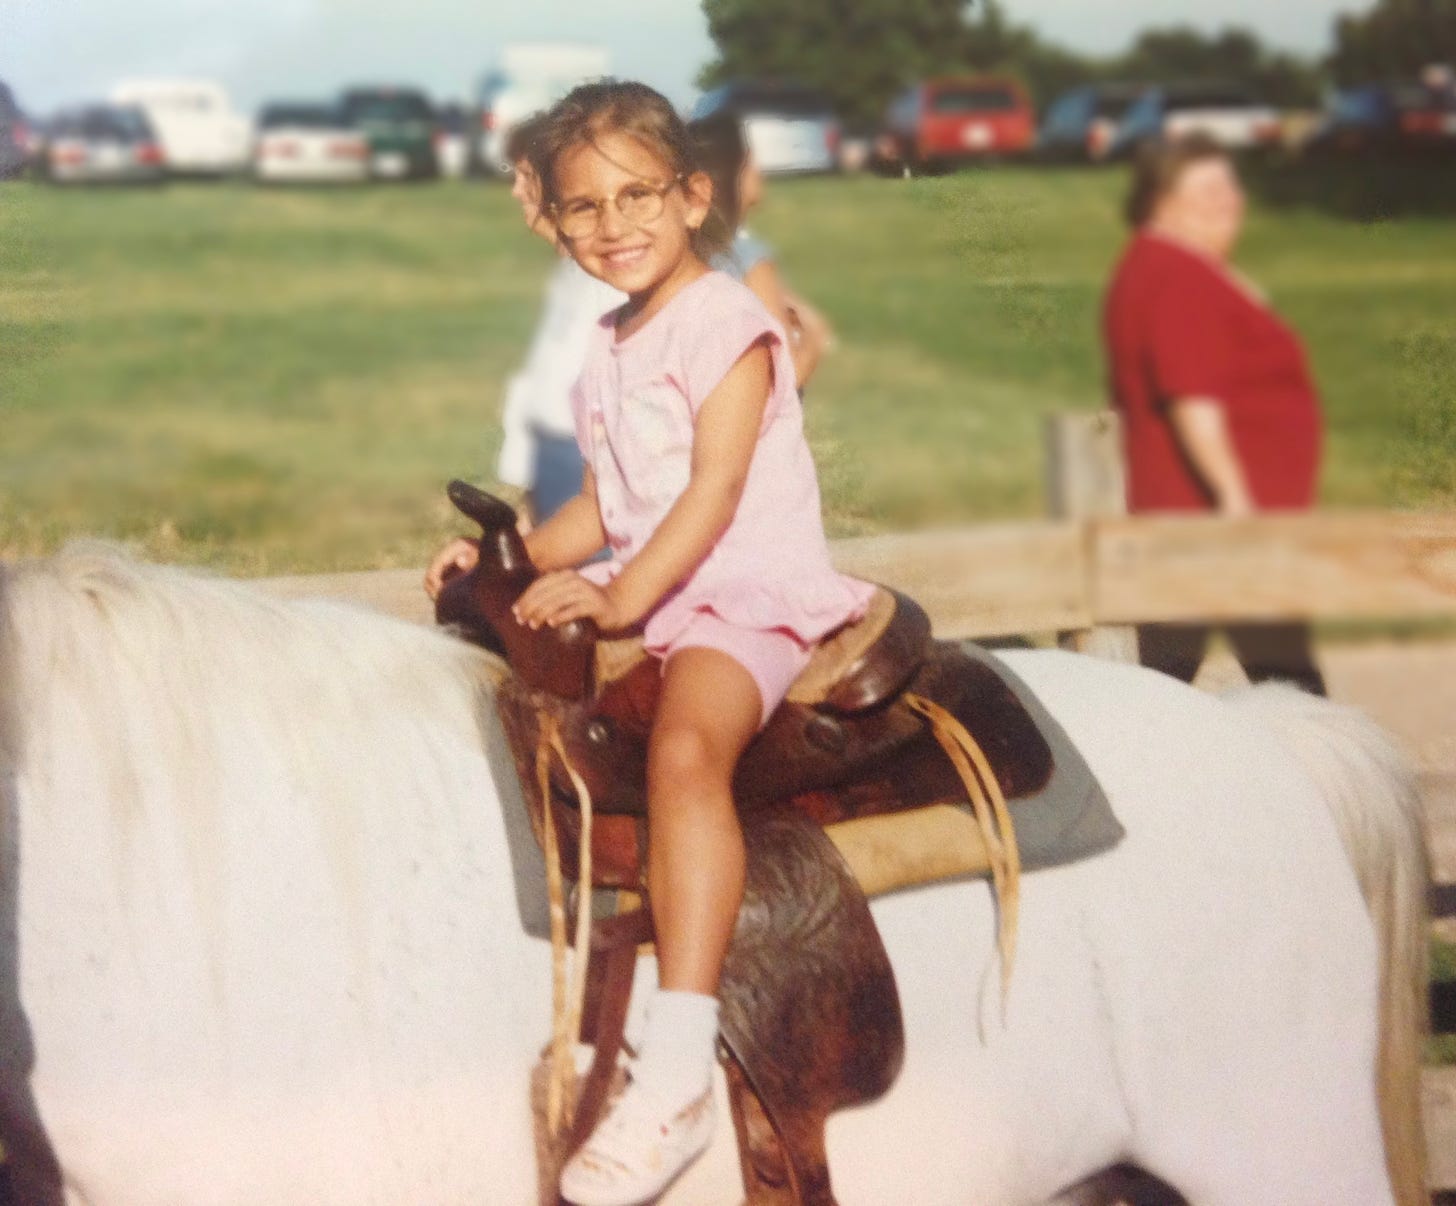 Little Shohreh is pictured in matching baby pink shorts and a top sitting on a brown saddle atop a white horse.